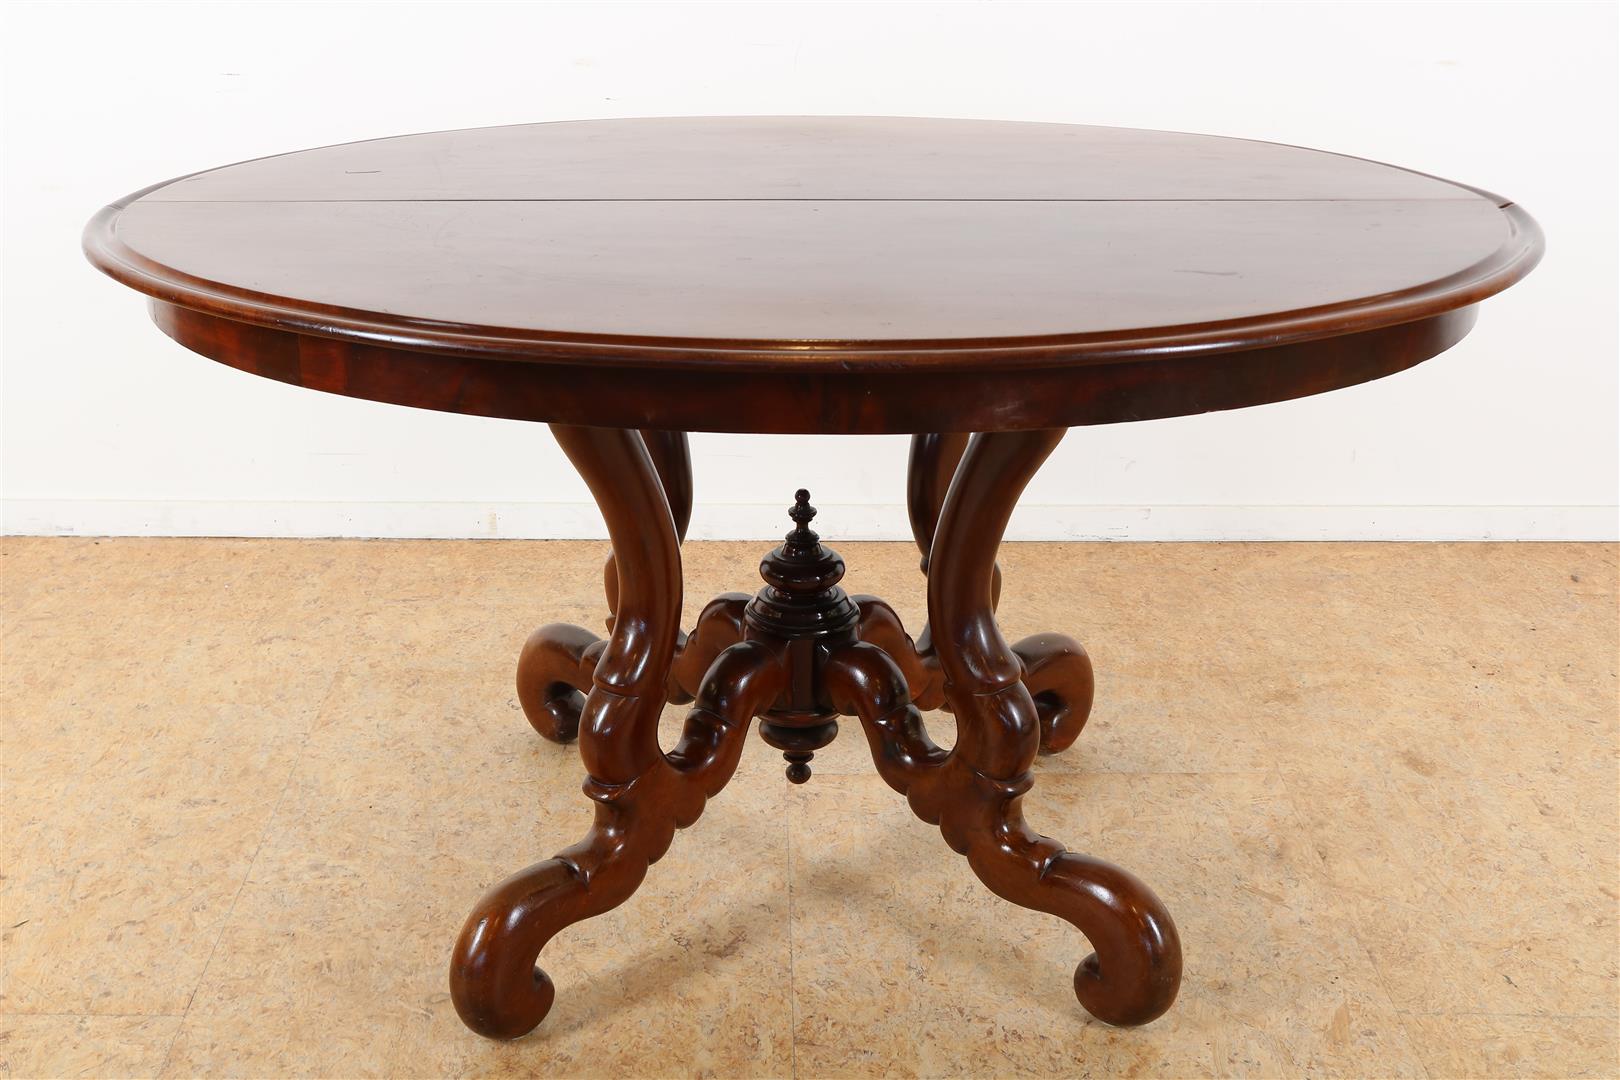 Mahogany Biedermeier coulisse table on spider head leg, 19 century, 74 x 135 x 108 cm, with